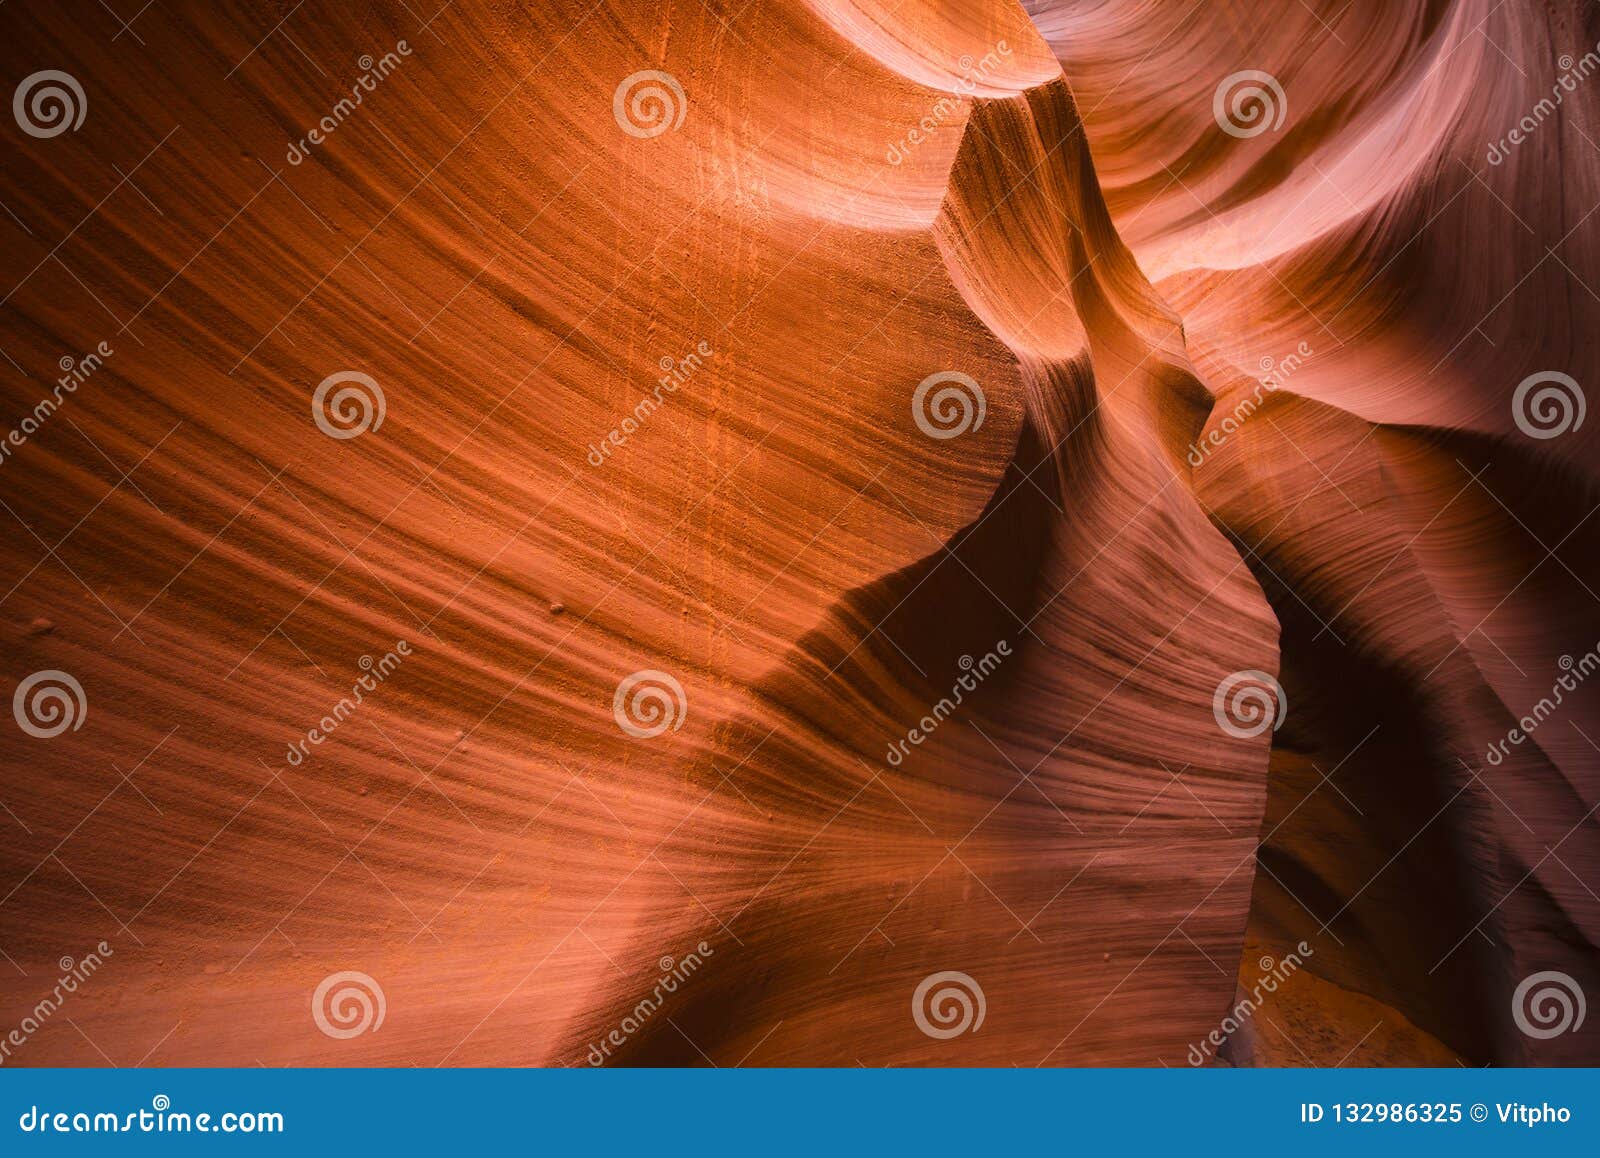 artistic waves of the sandstone walls of the lower canyon antelope in arizona ignite the imagination of the boundless possibility